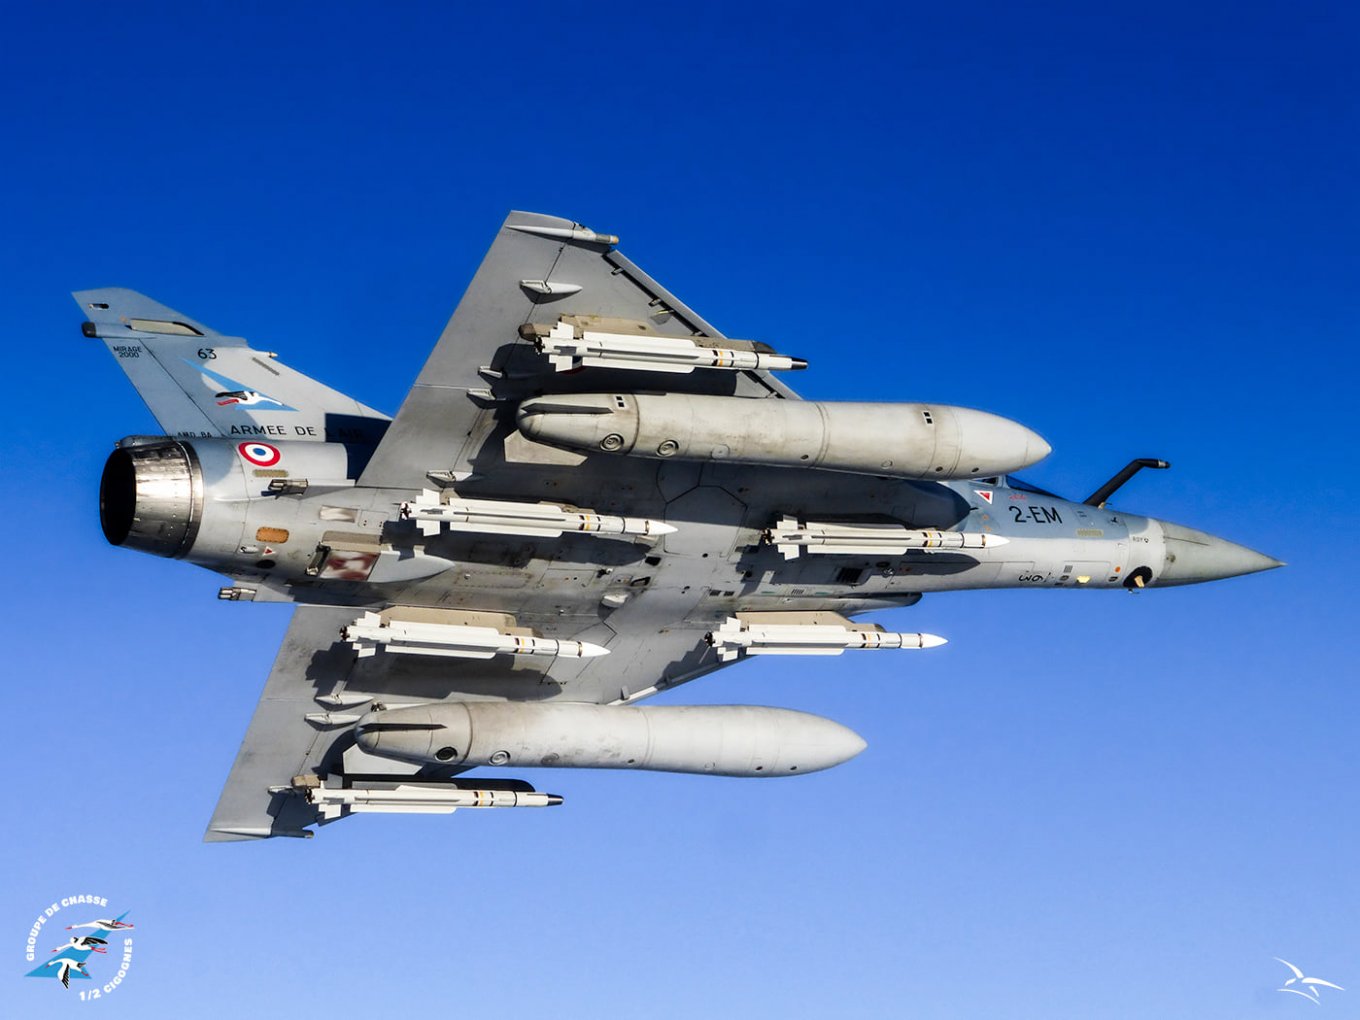 Defense Express / Mirage 2000-5: What the French Fighter Can and Cannot Do, A Sober Glance Without Exaggeration